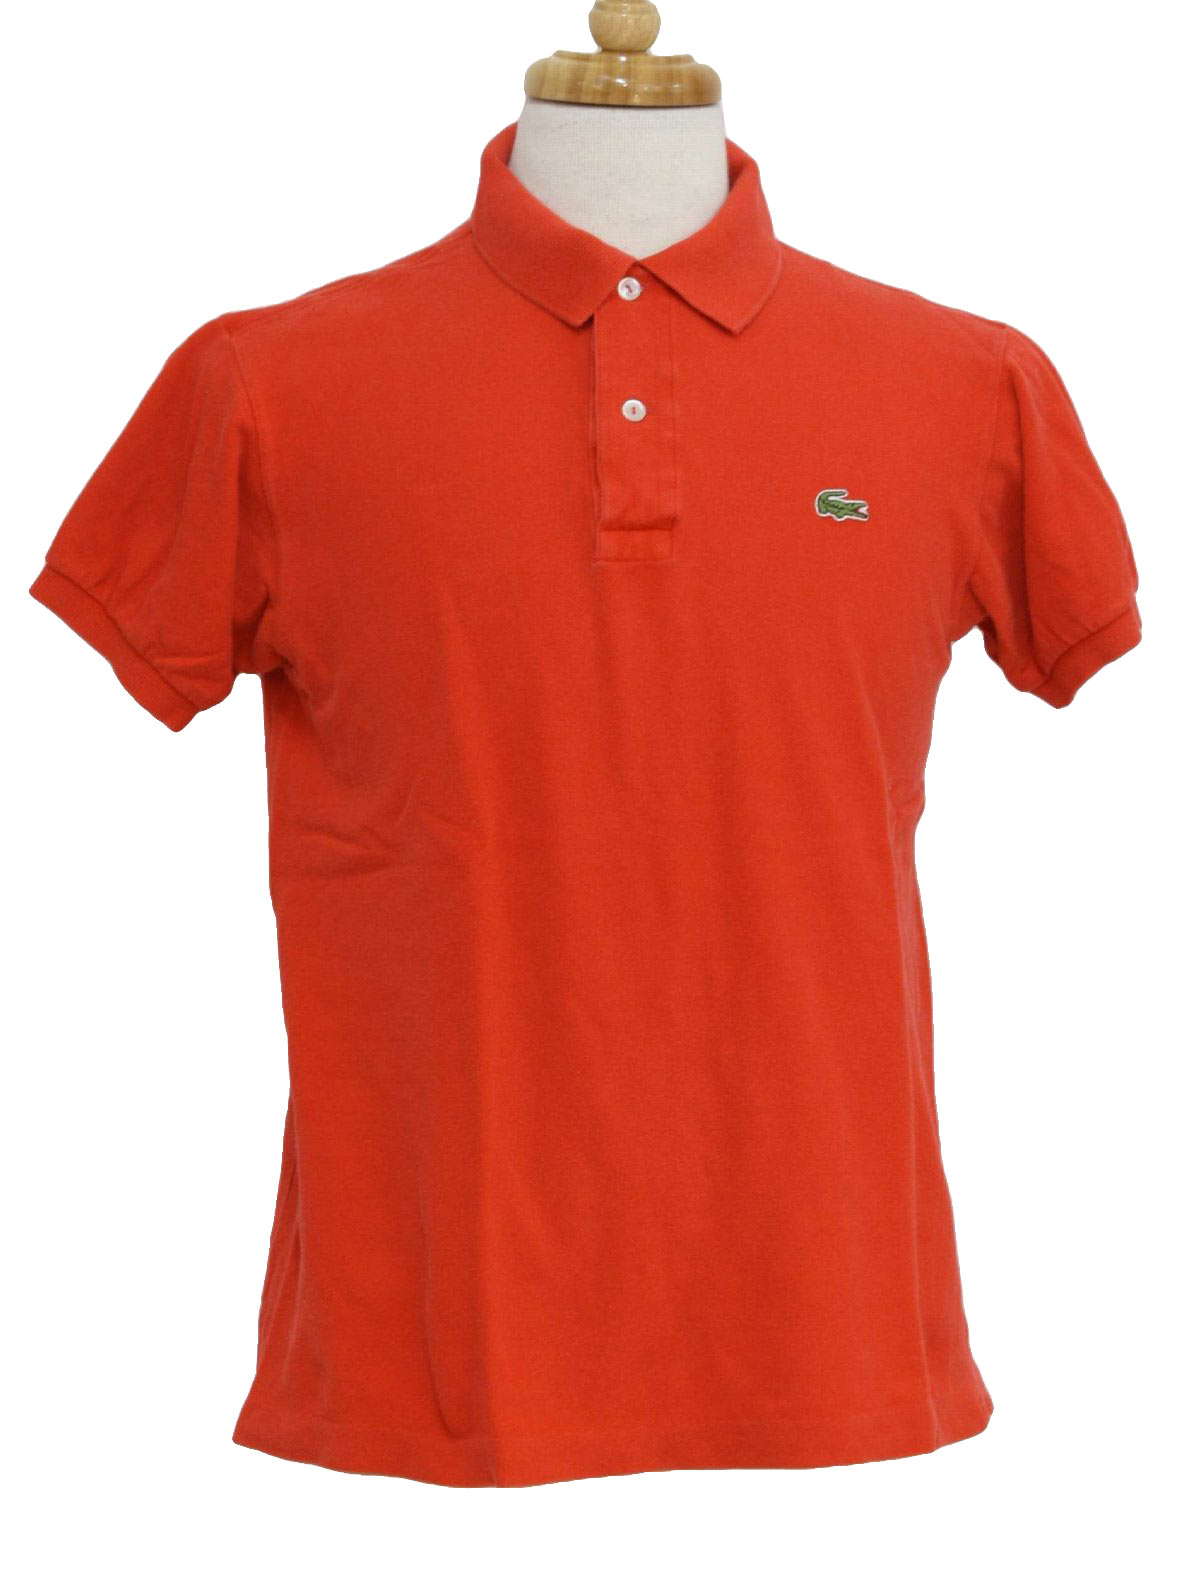 izod polo shirts with alligator,Quality T Shirt Clearance!